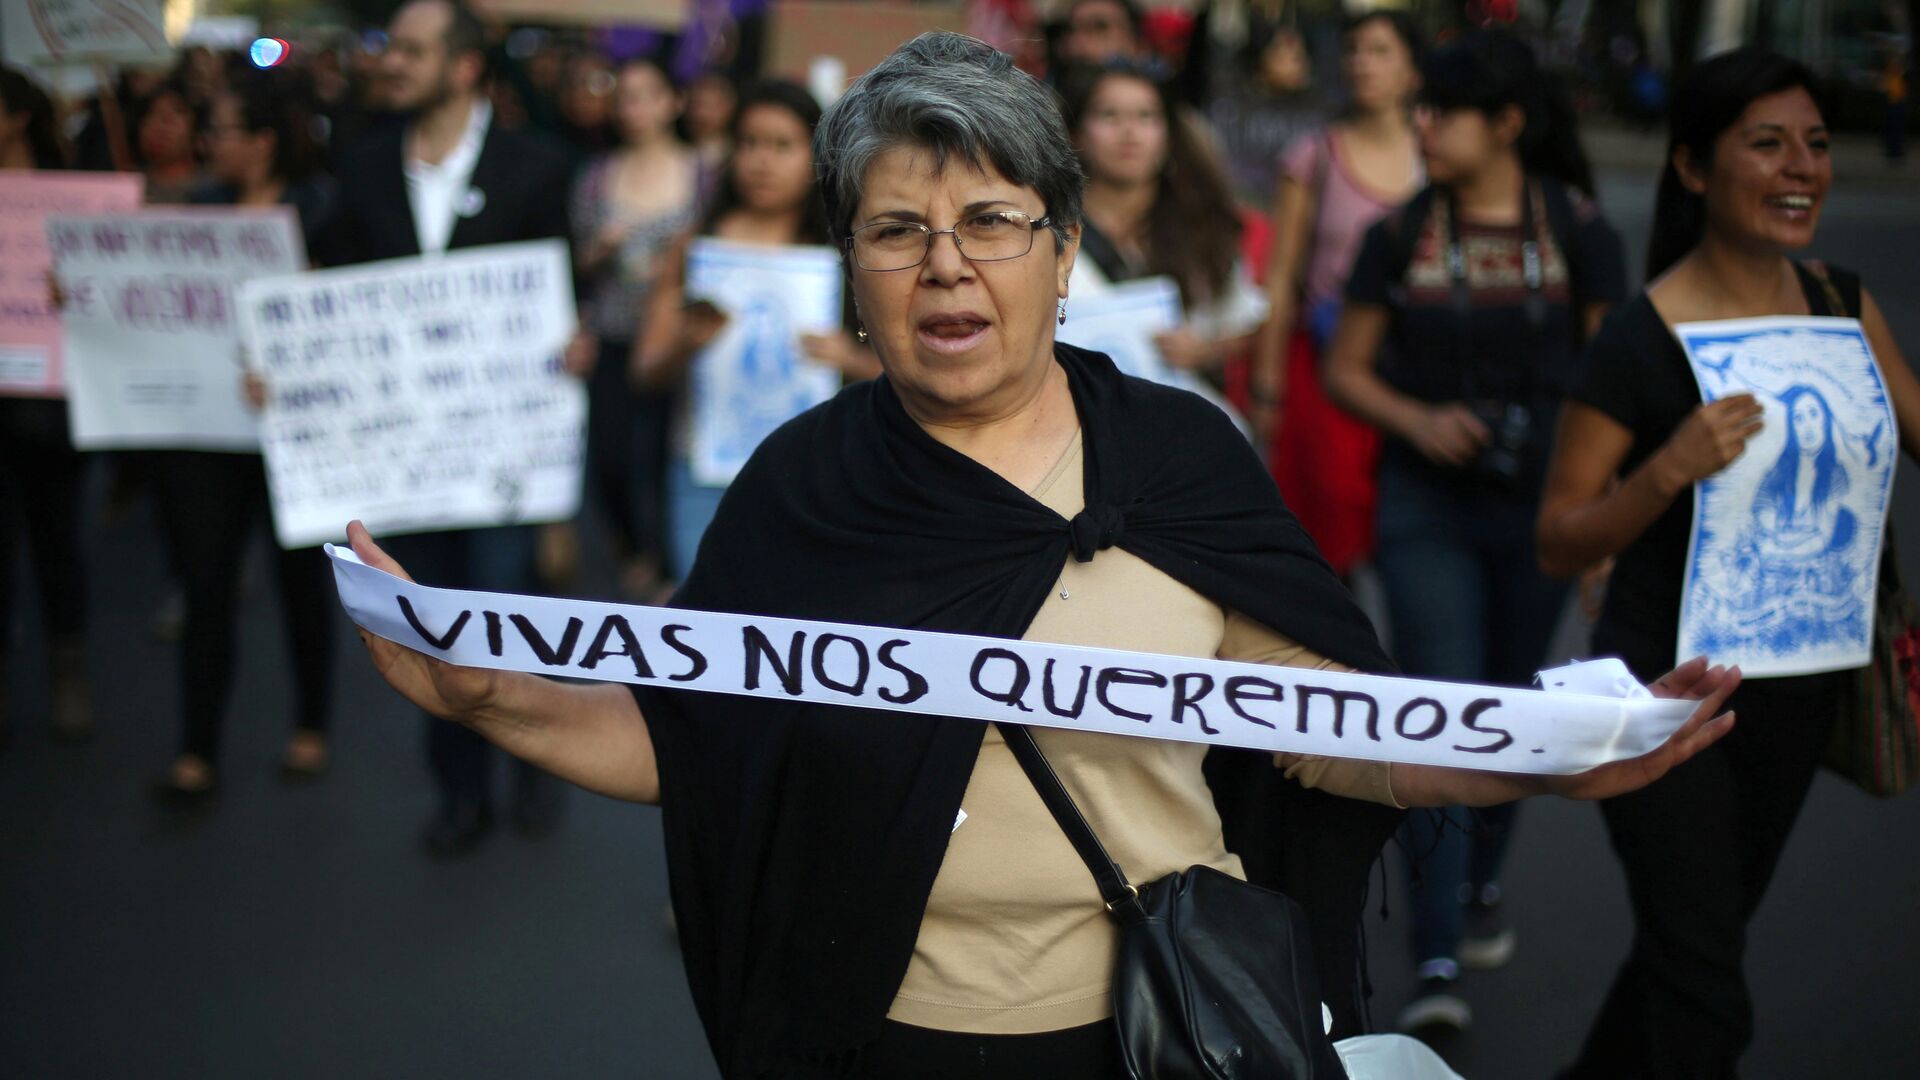 A woman takes part in a march to protest violence against women and the murder of a 16-year-old girl in a coastal town of Argentina last week, at Reforma avenue, in Mexico City, Mexico, October 19, 2016 - Sputnik Mundo, 1920, 27.08.2021